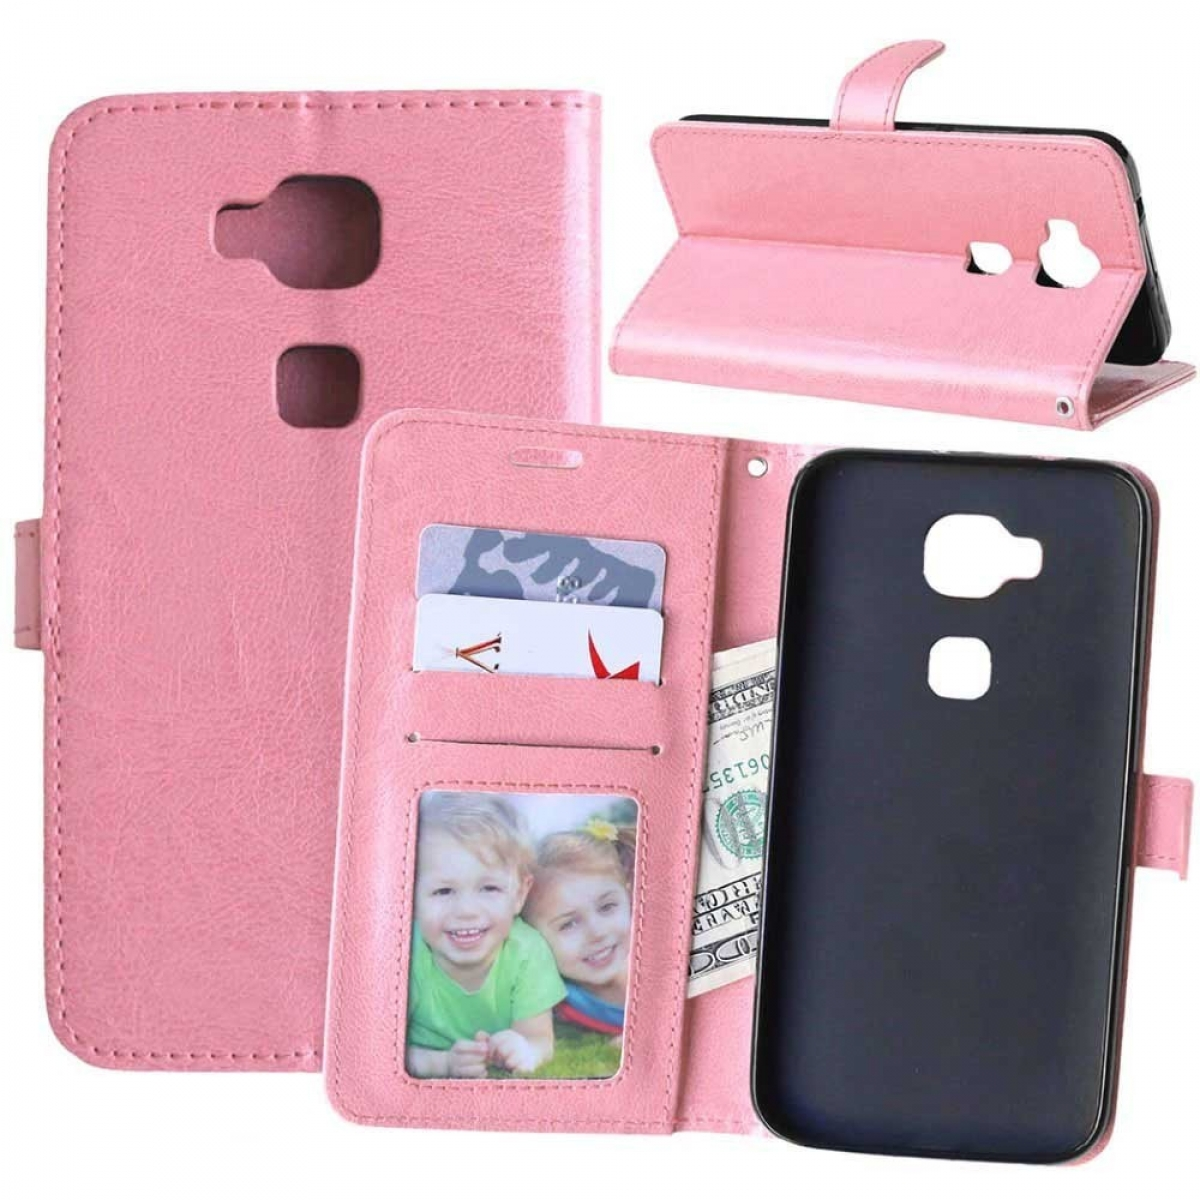 Pink, Klappbare Huawei, Multicolor 5X, Hell CASEONLINE Honor Bookcover, -